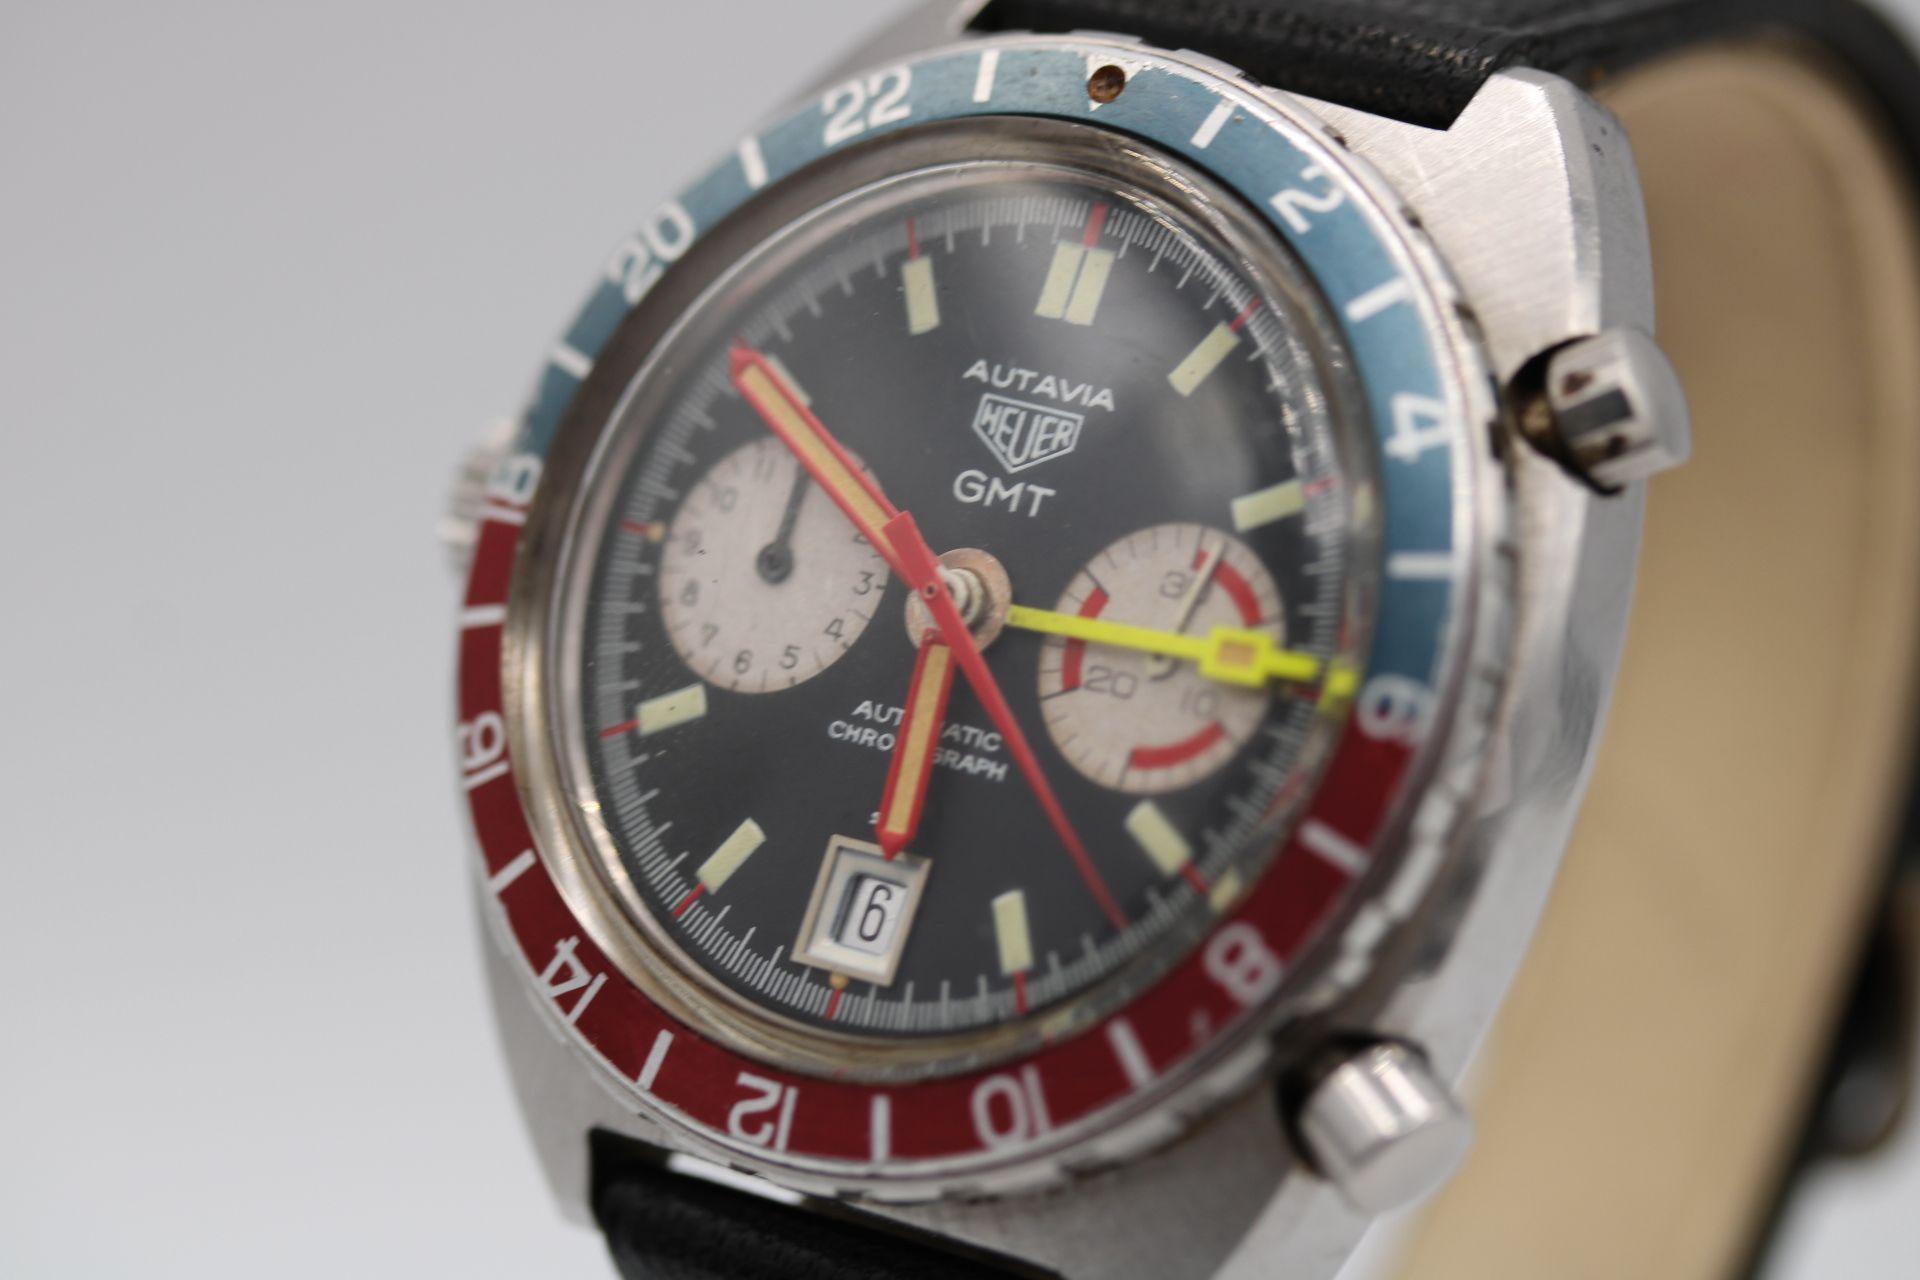 We are fortunate to be able to offer this stunning original Heuer Autavia GMT. A piece that will take centre stage!

It goes without saying a much sought after piece. This particular Heuer was purchased from the original owners family appearing not